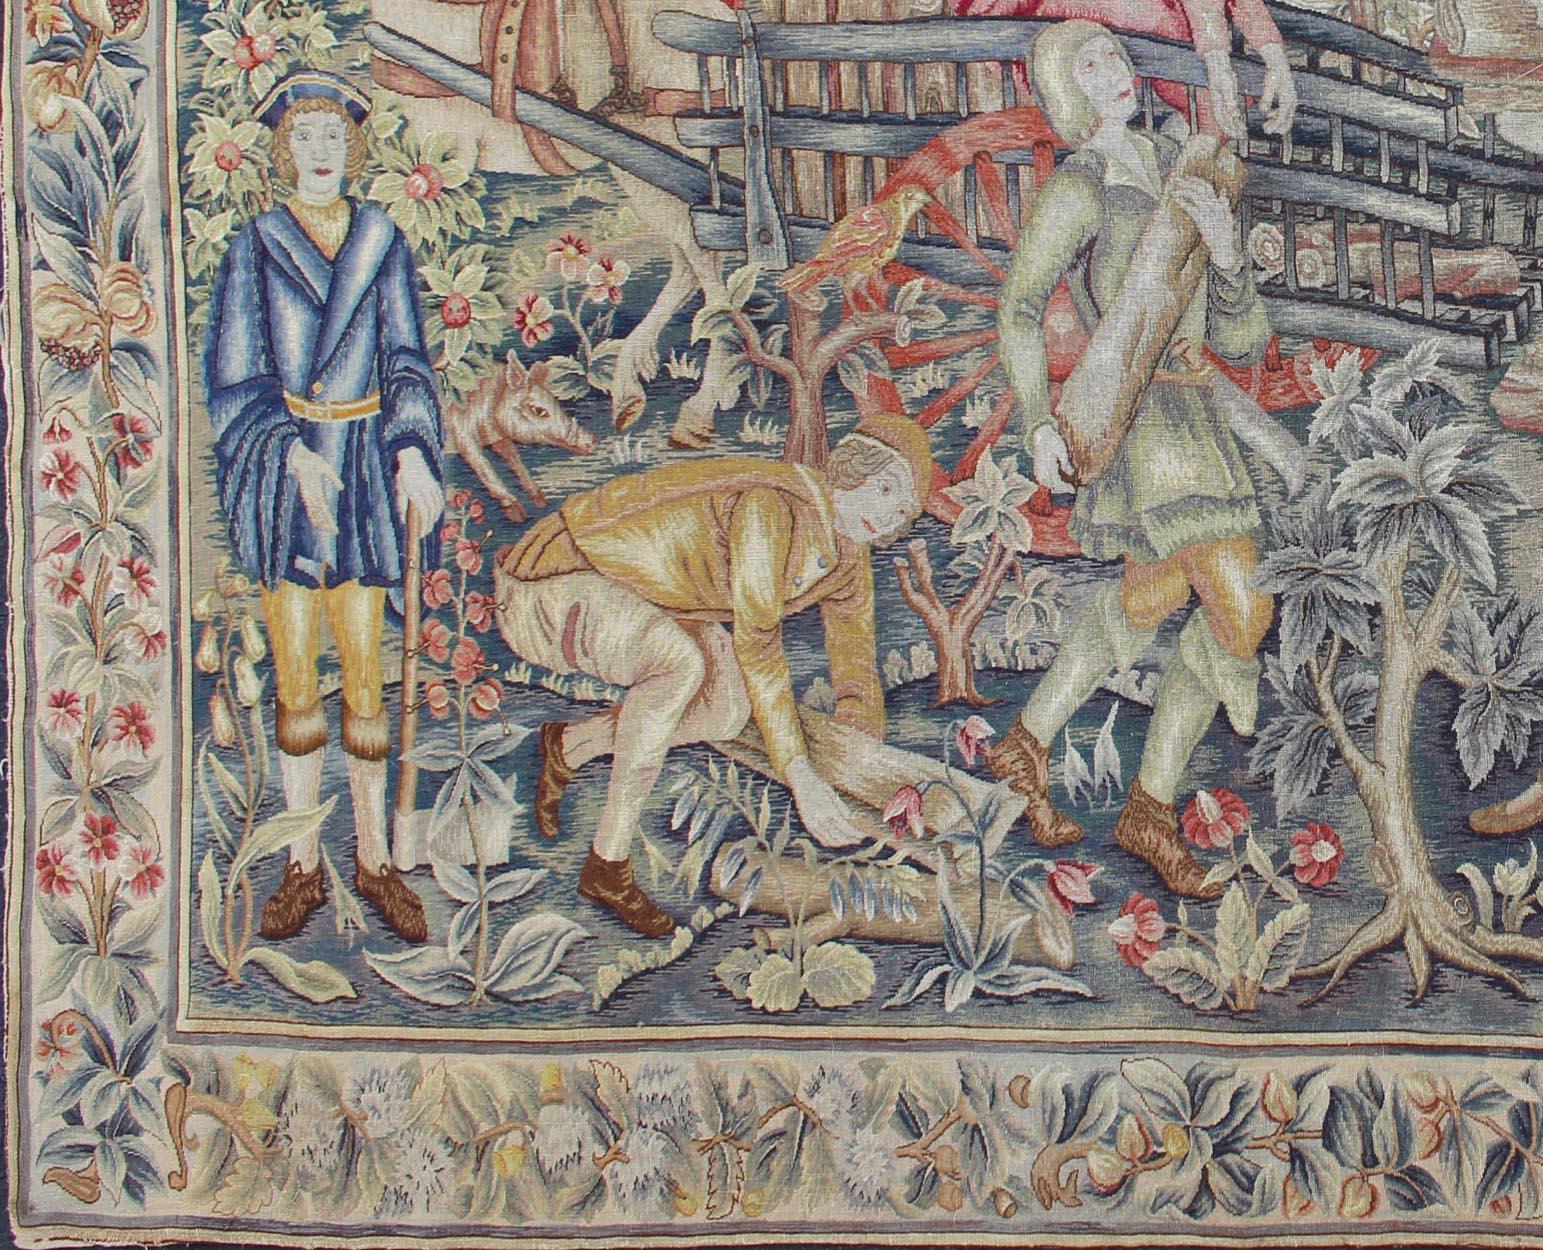 French antique tapestry with people, animals, greenery, and castle, rug 19-0509, country of origin / type: France / Tapestry, circa 1860

This tapestry represents a unique and rare piece of history. Dating back to the 19th century France, it